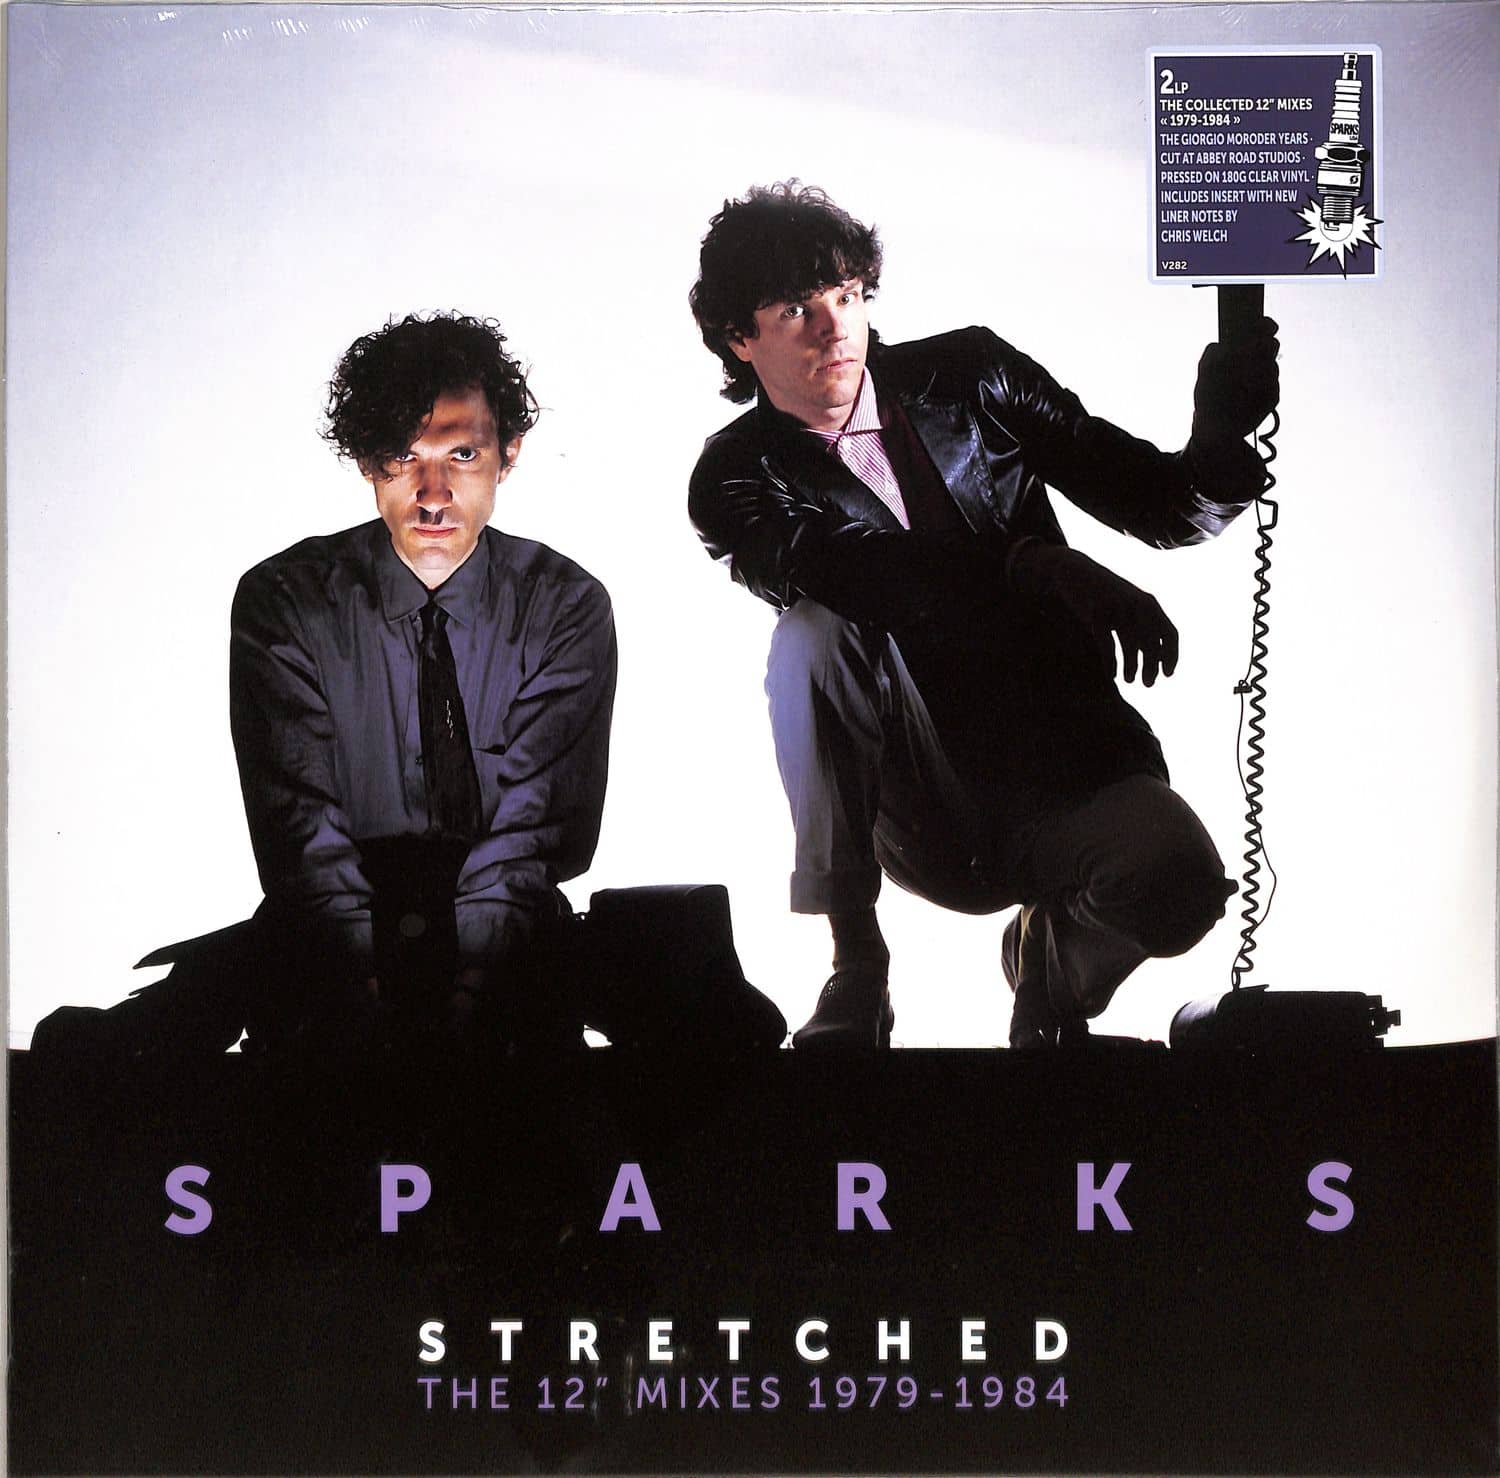 Sparks - STRETCHED - THE 12 INCH MIXES 1979-1984 